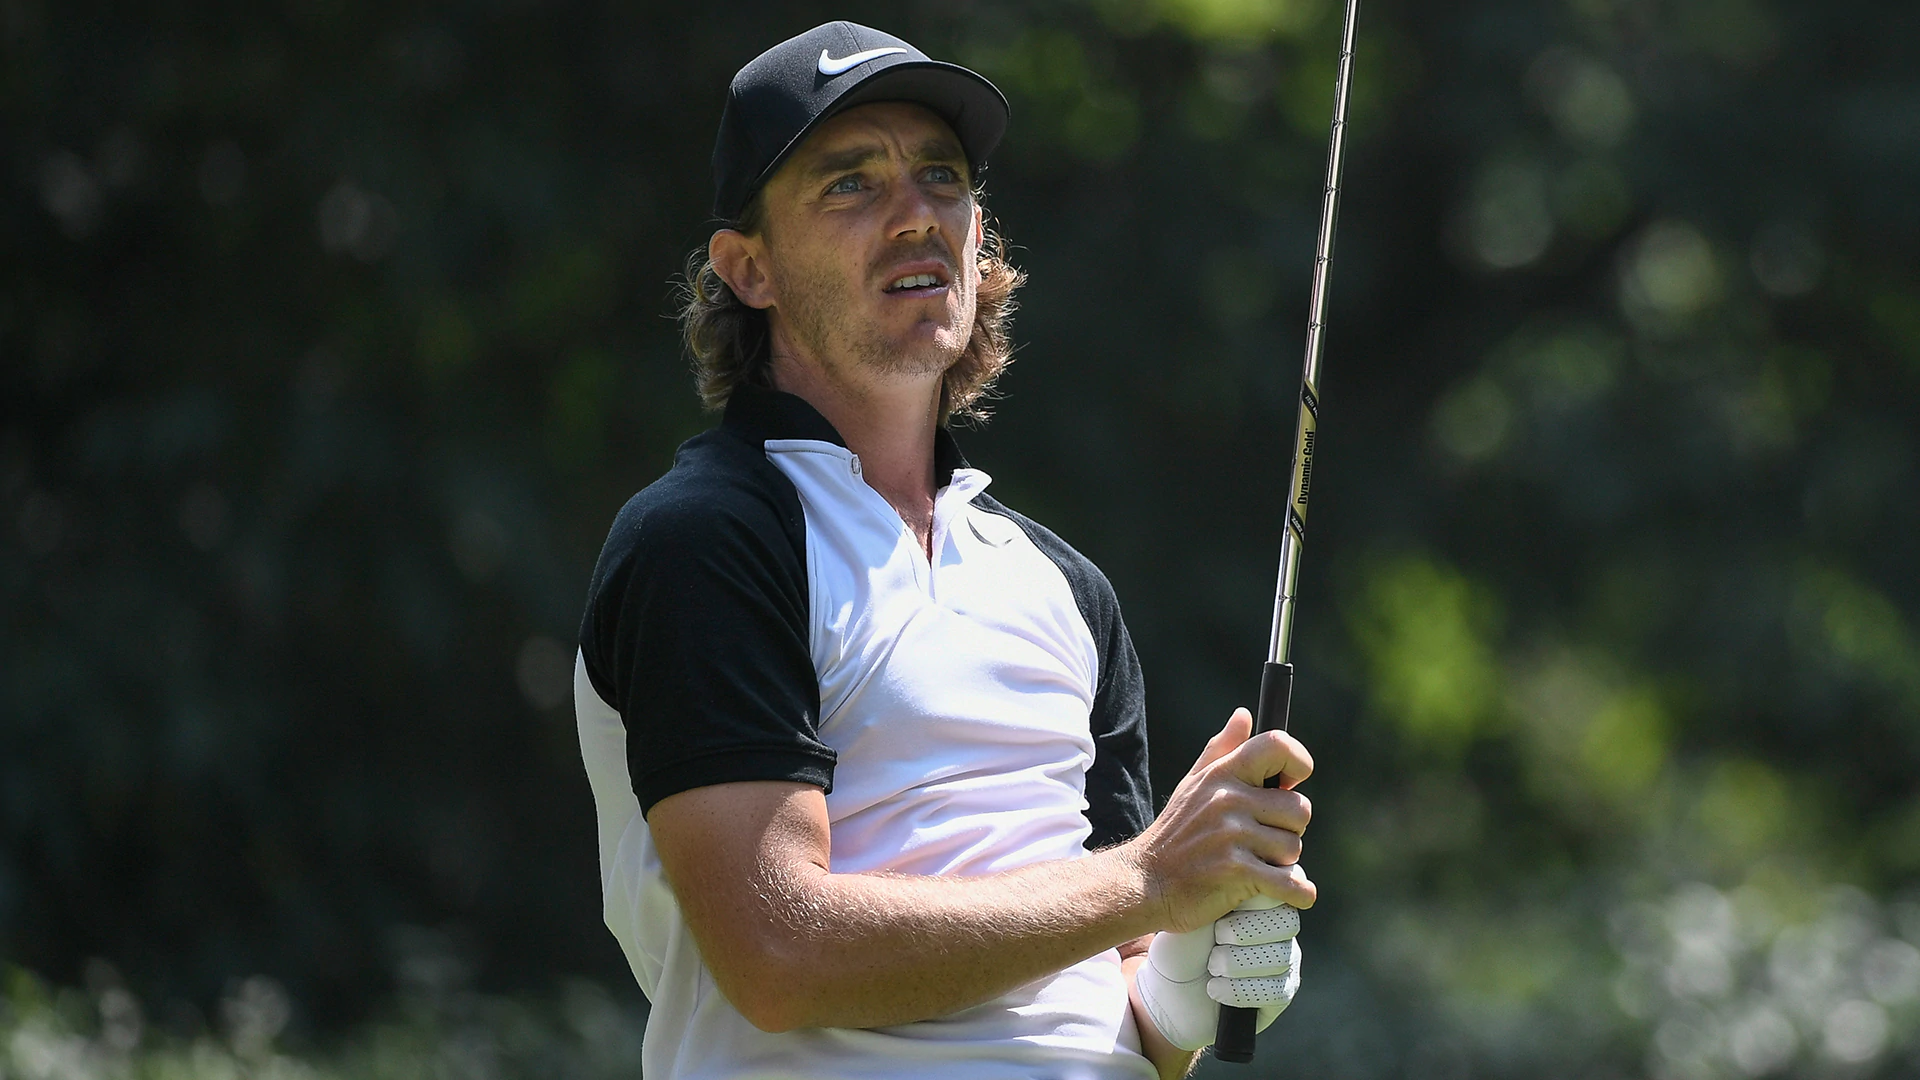 WGC-Mexico runner-up fueled Fleetwood's rise